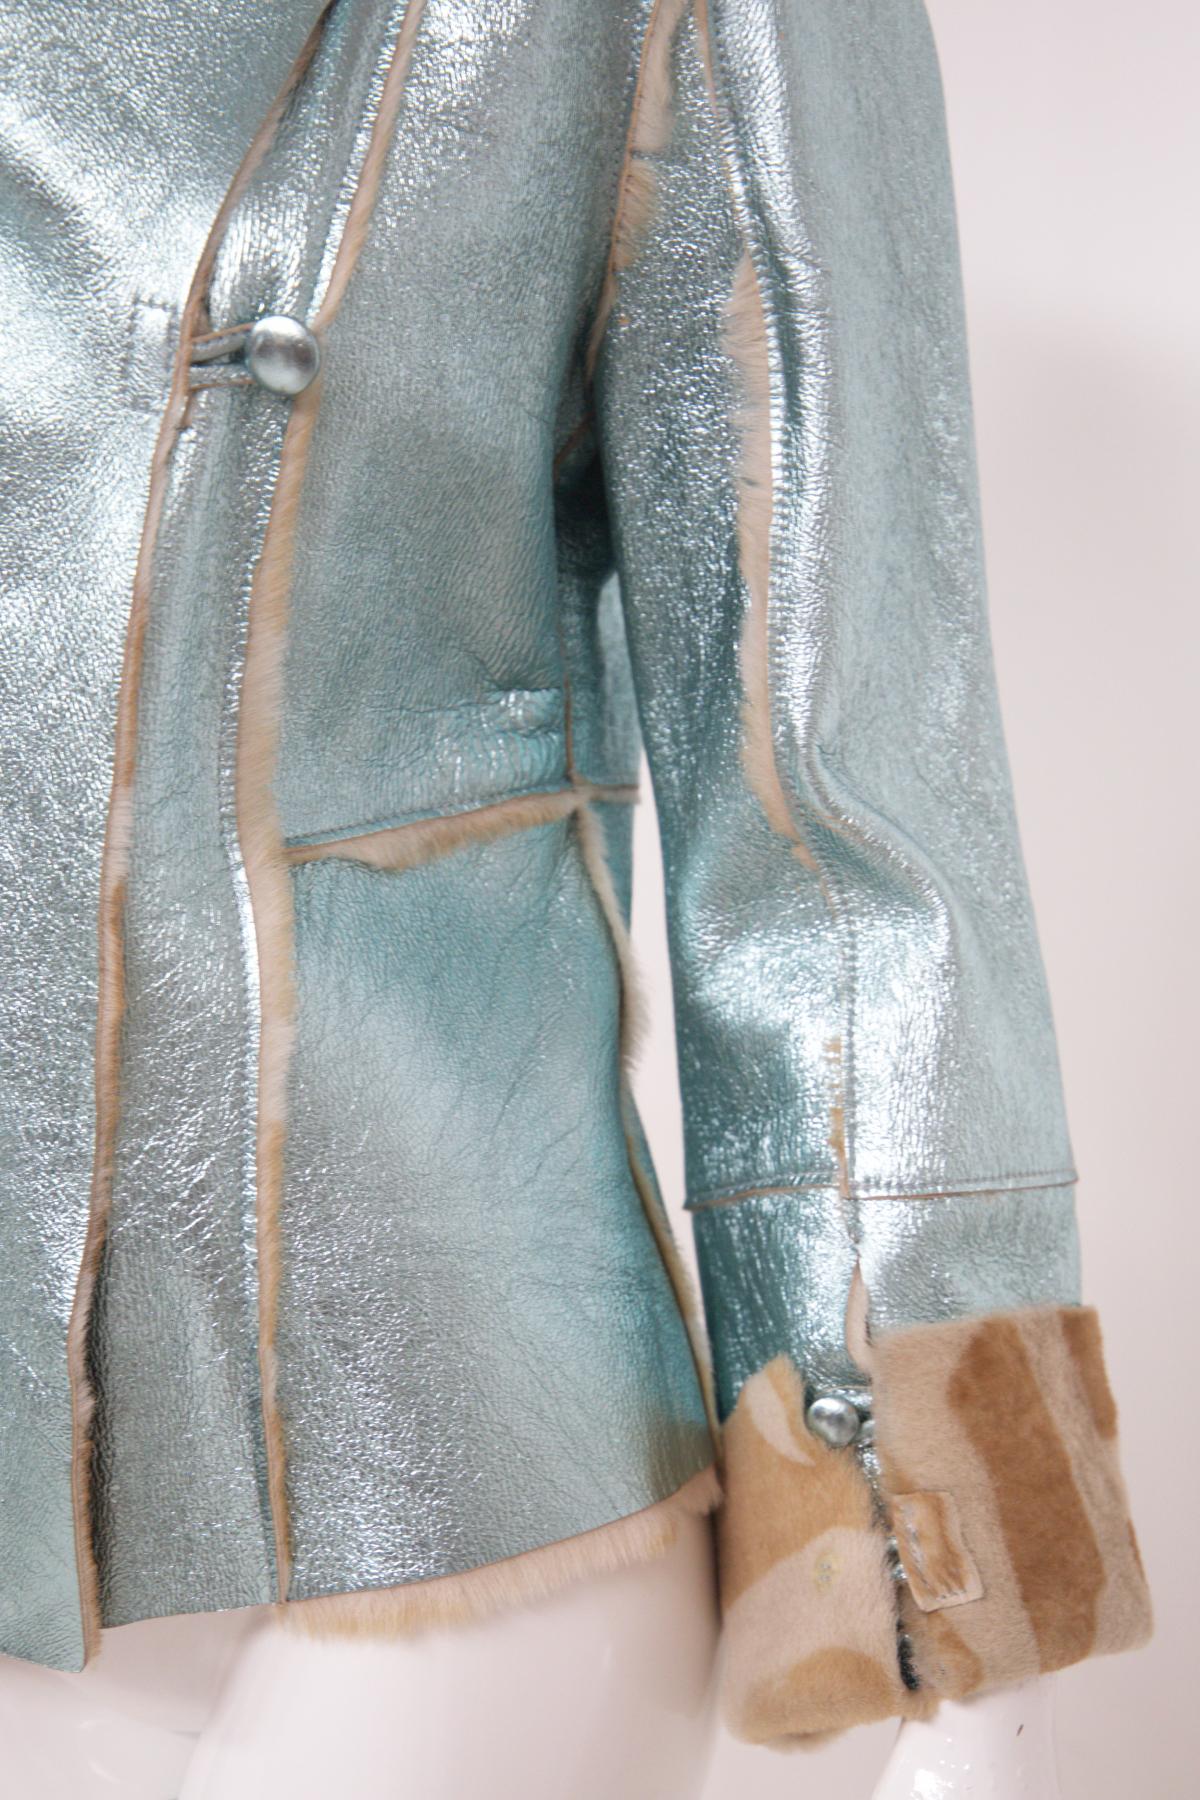 Versus Gianni Versace Eccentric Blue Leather Jacket For Sale 5